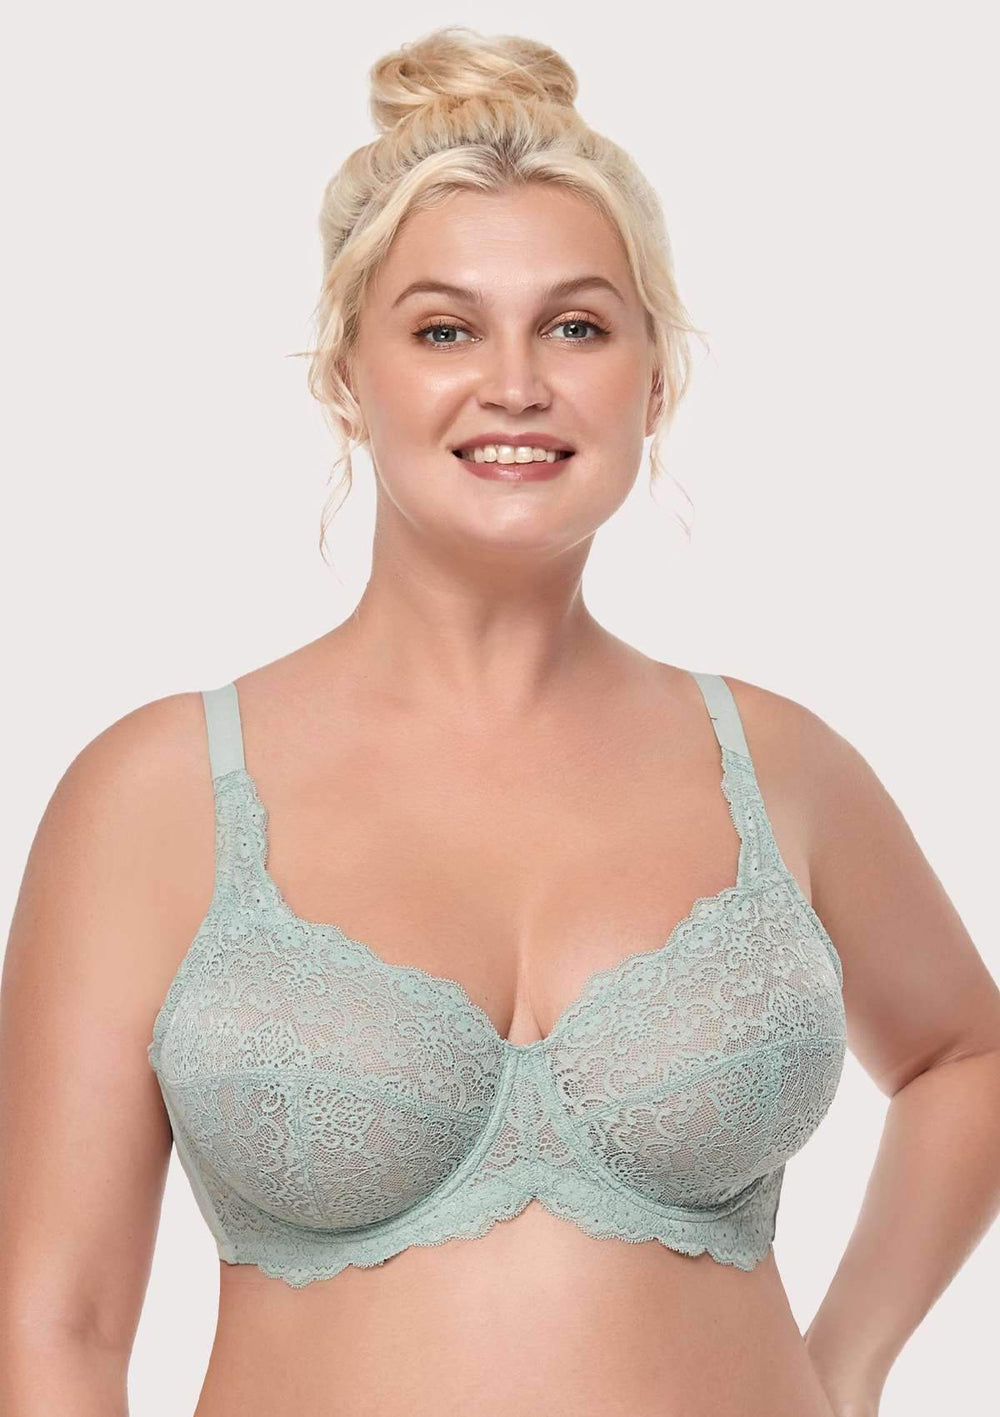  Womens Floral Lace Bra Plus Size Firm Hold Non